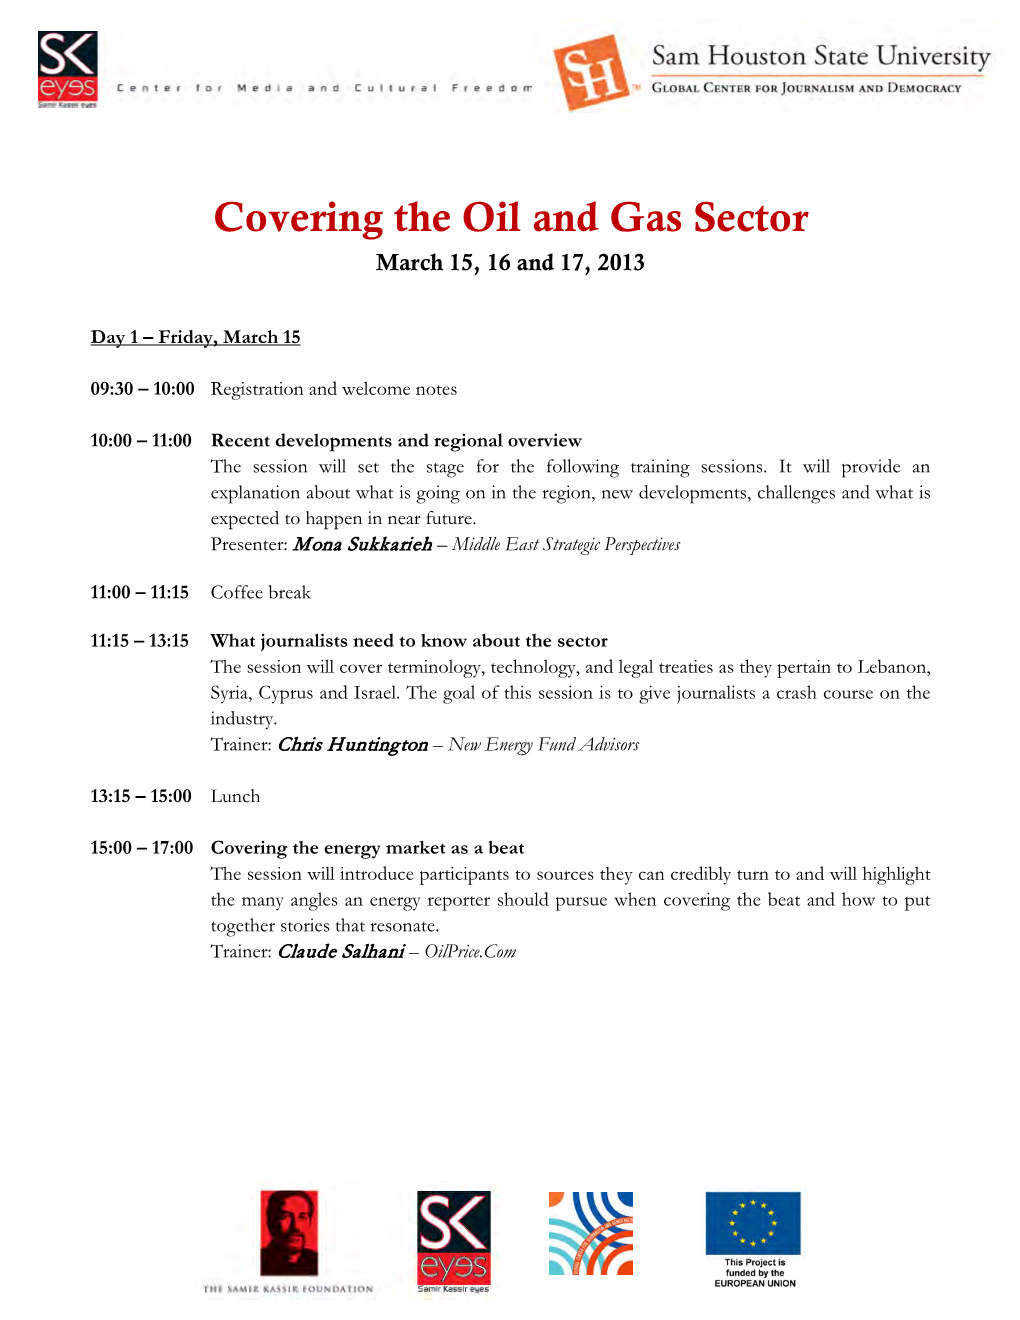 Covering the Oil and Gas Sector March 15, 16 and 17, 2013